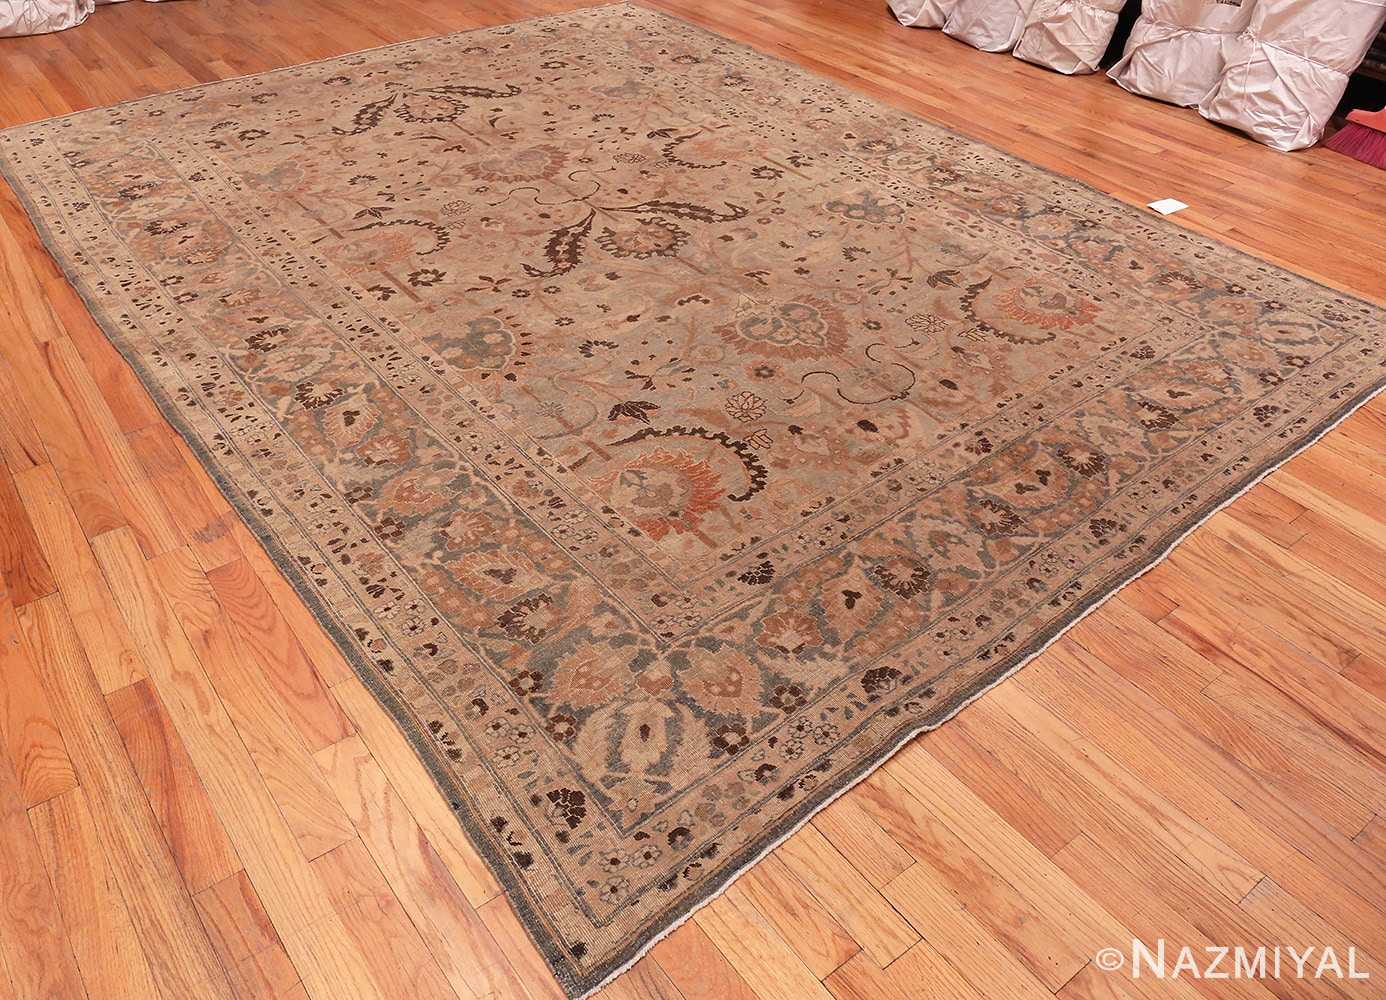 Overall Picture from the side of Antique Persian Khorassan Rug #49631 from Nazmiyal Antique Rugs in NYC